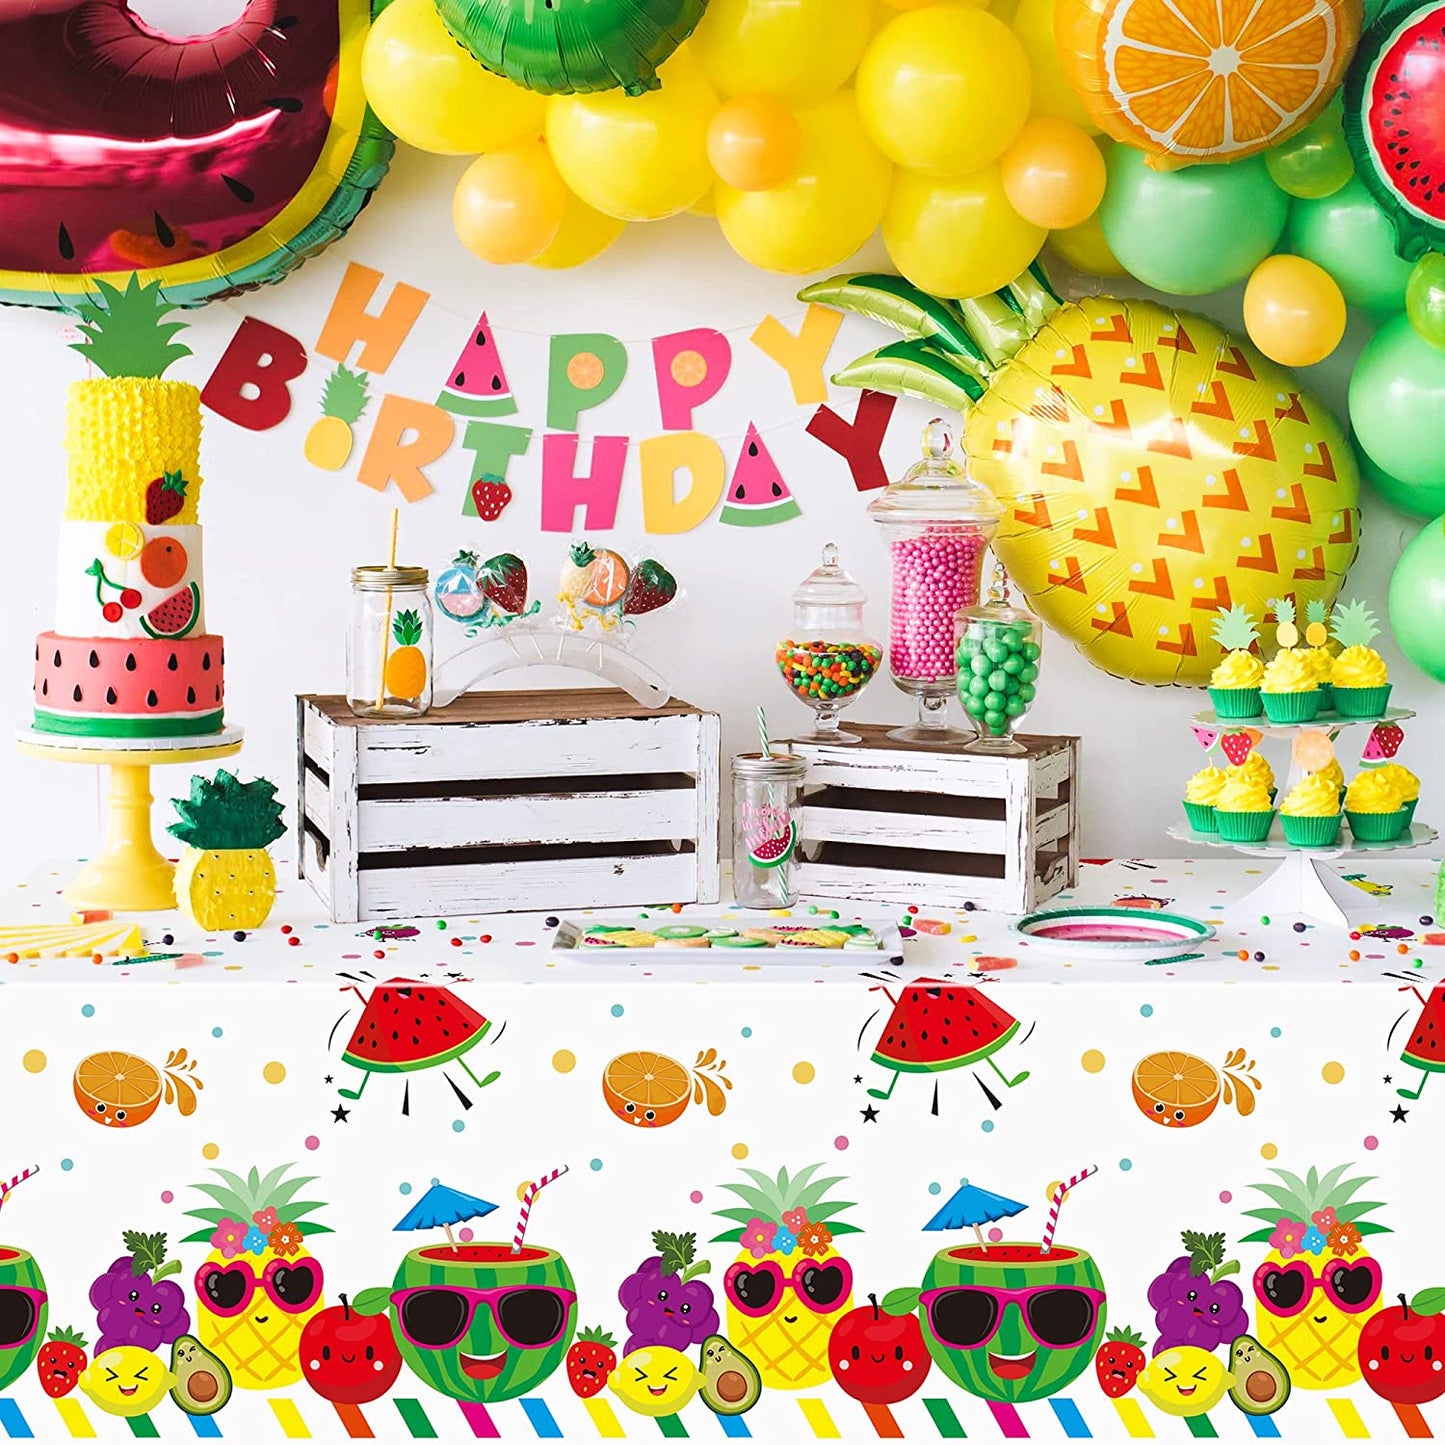 BkeeCten 3 Packs Fruit Theme Table Cover Decorations Watermelon Pineapple Disposable Plastic Tablecloths for Kids Birthday Baby Shower Summer Fruit Hawaii Party Decorations Supplies, 54x108 inch